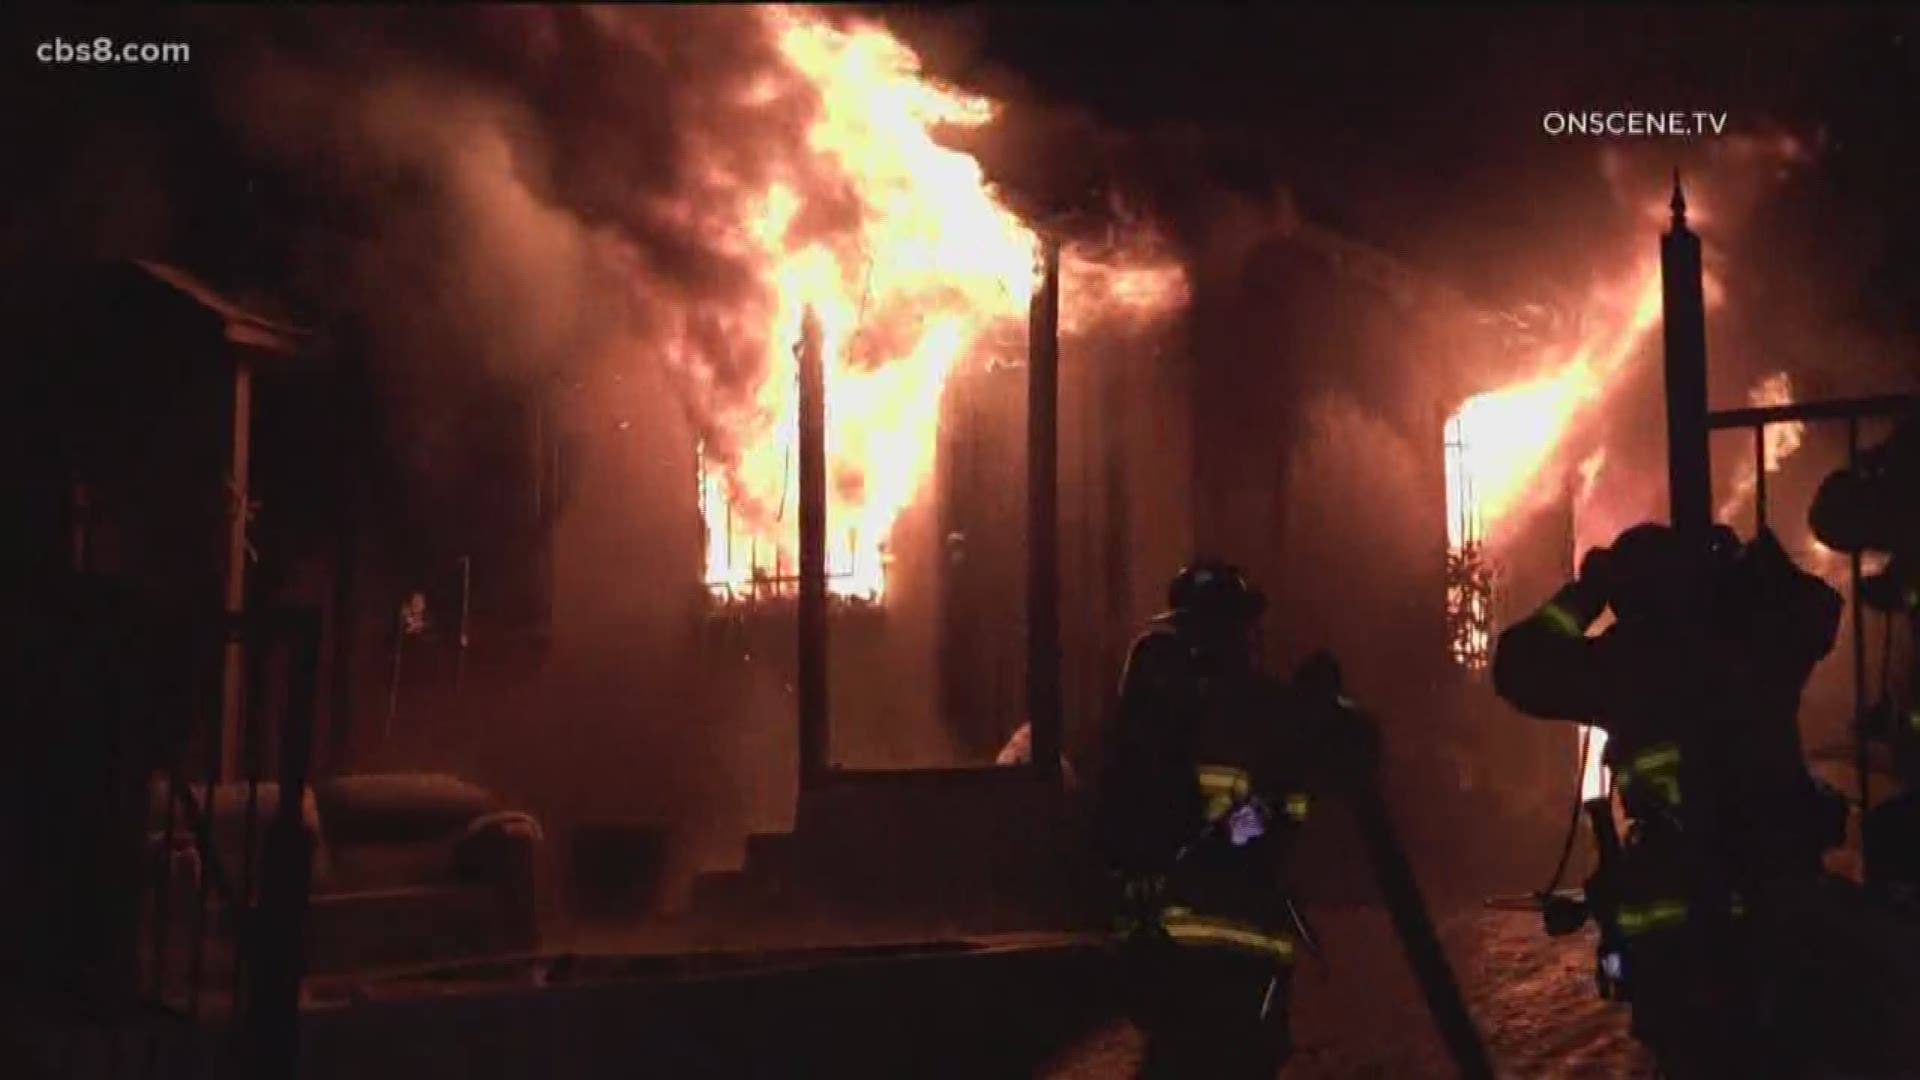 Arson investigators are looking into the cause of the deadly fire.